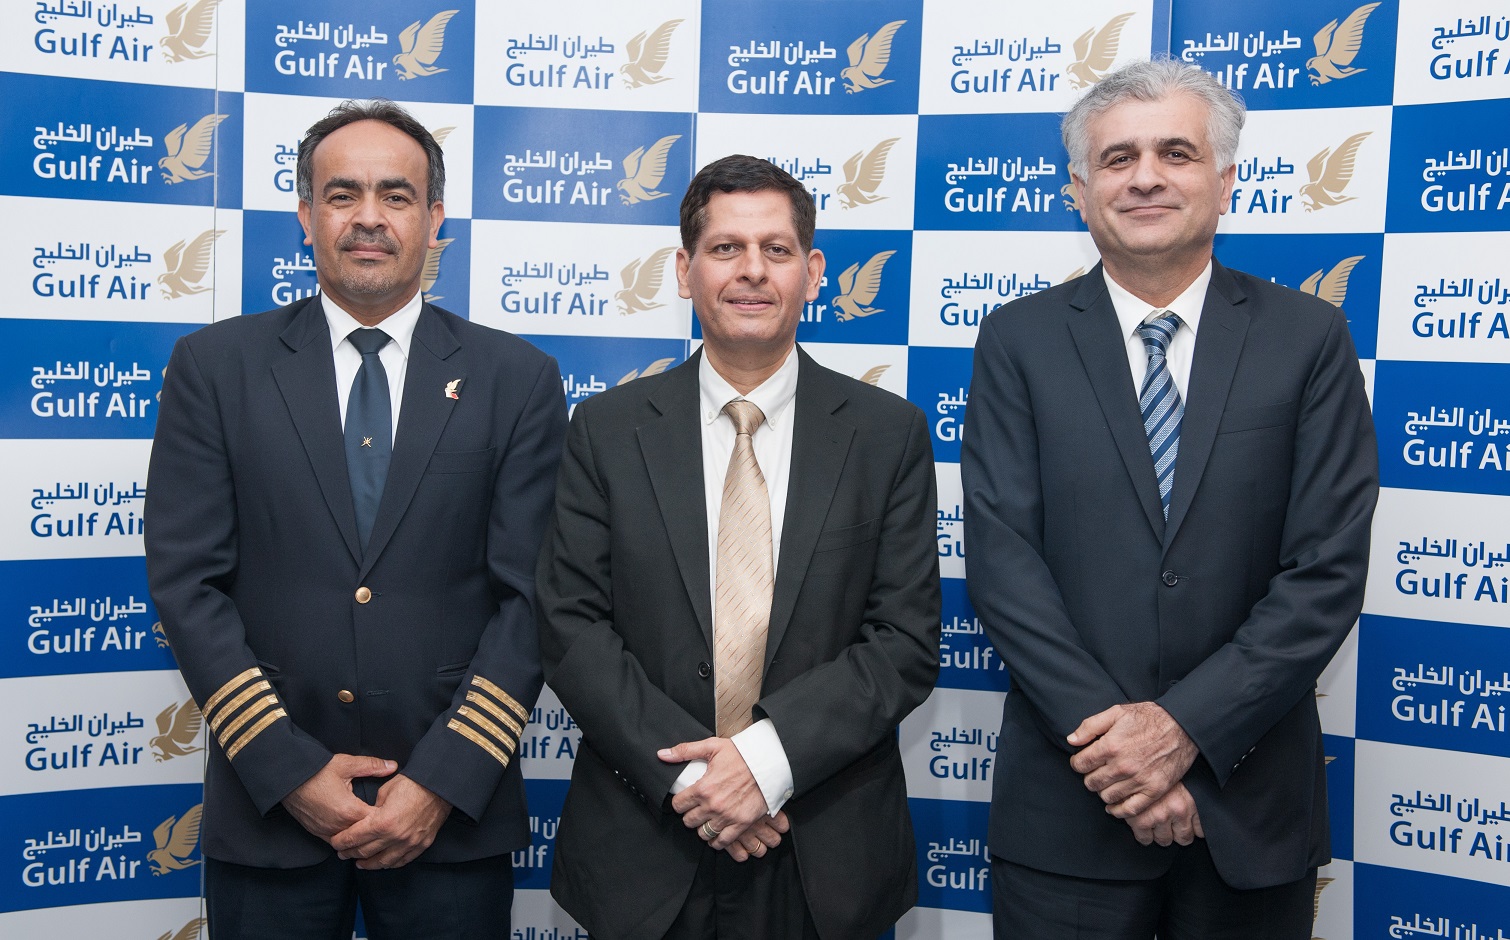 Gulf Air organises Business Continuity Management workshop